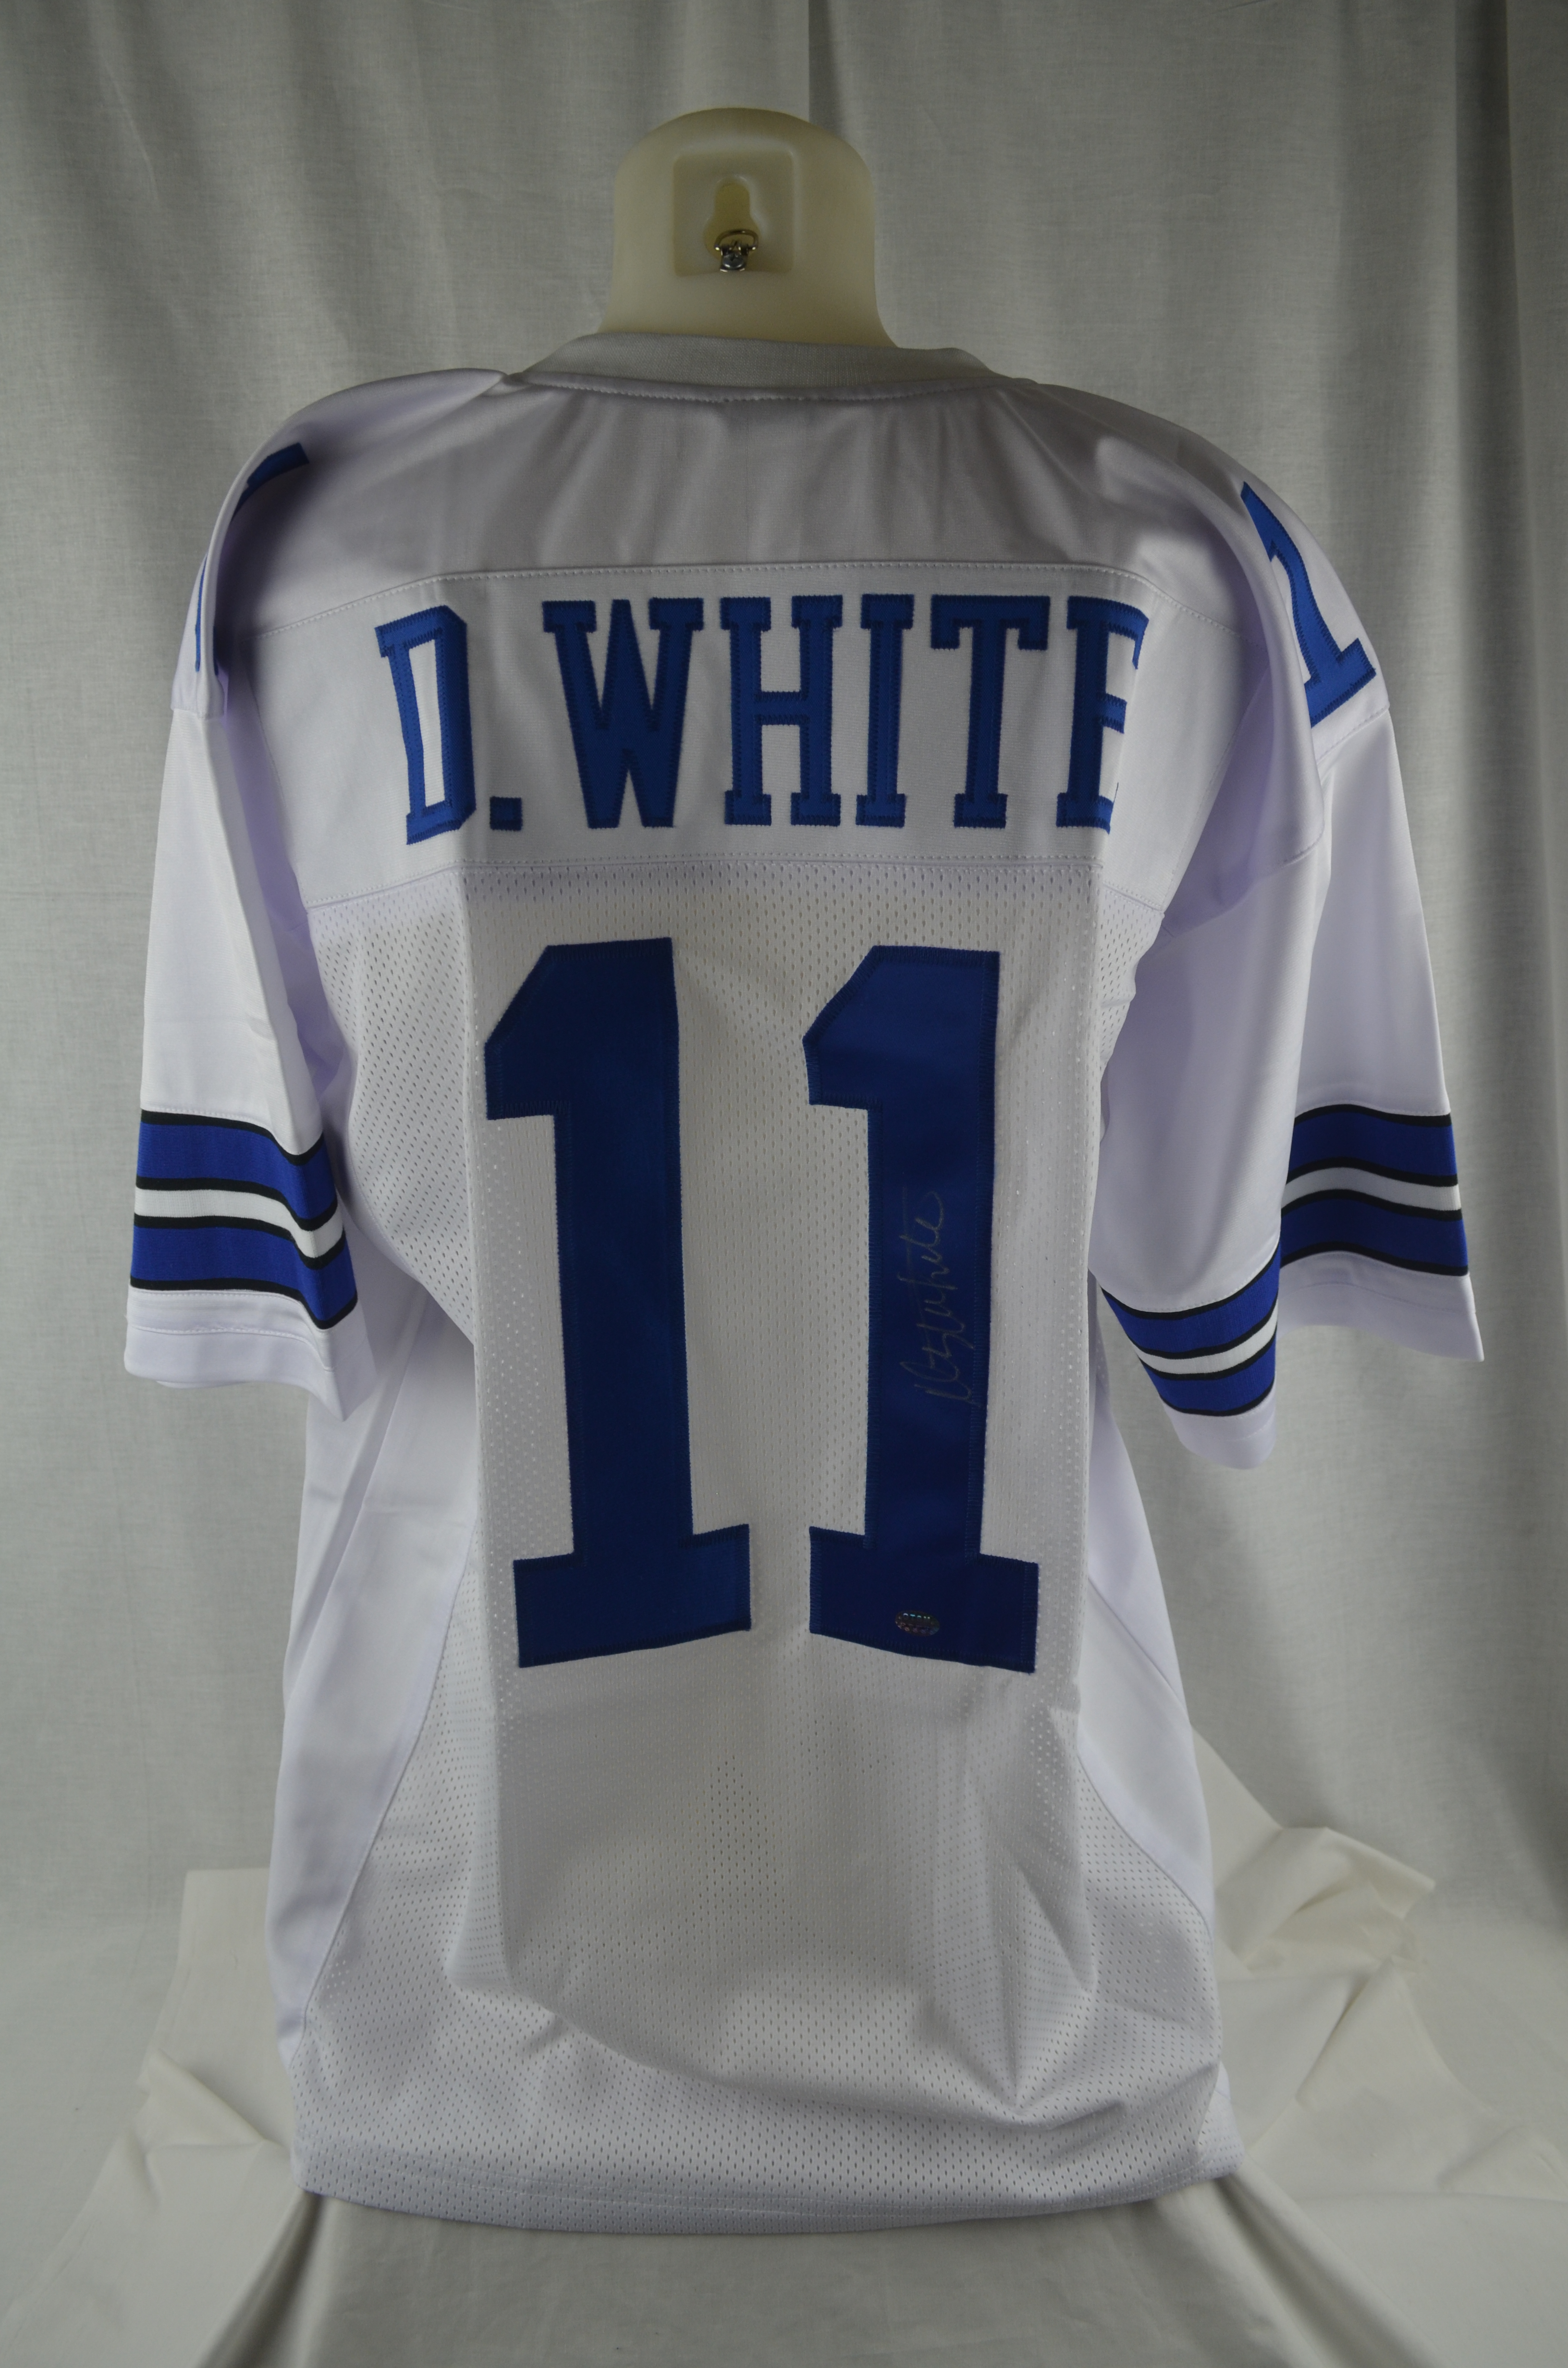 danny white jersey